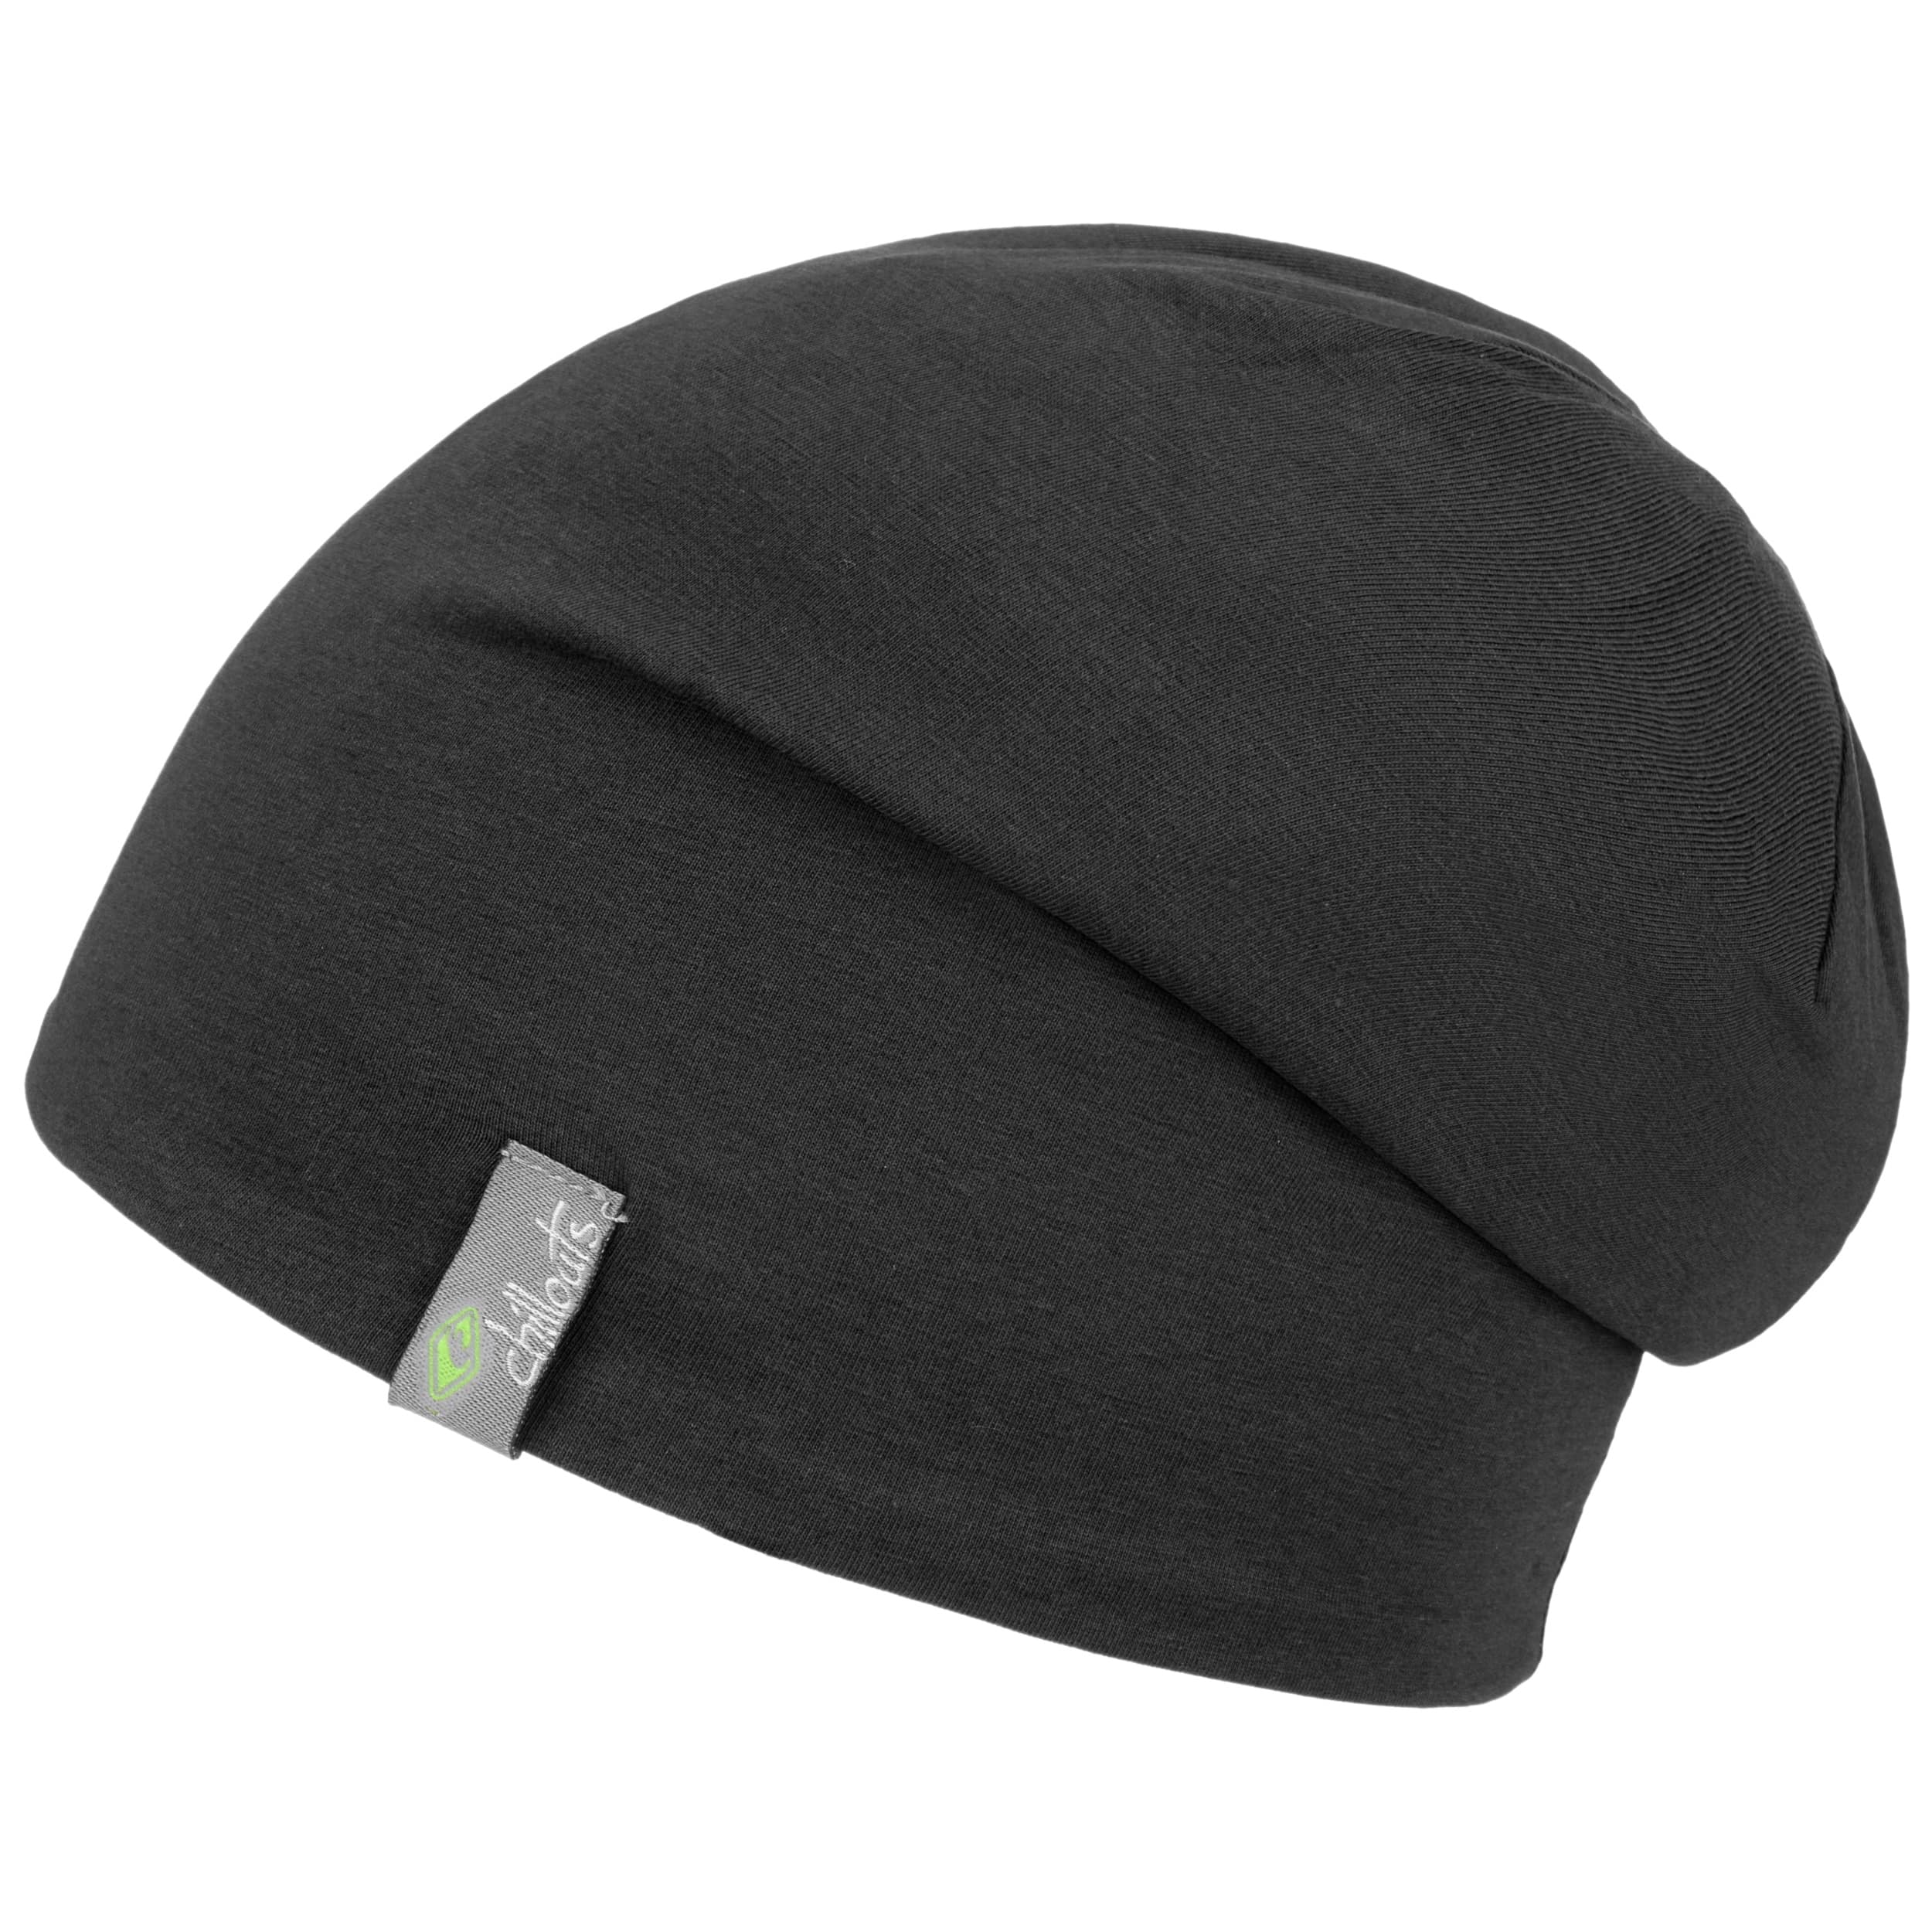 by Hatshopping ▷ Beanie Beanies --> Oversize online Chillouts Acapulco Hats, Shop Caps &